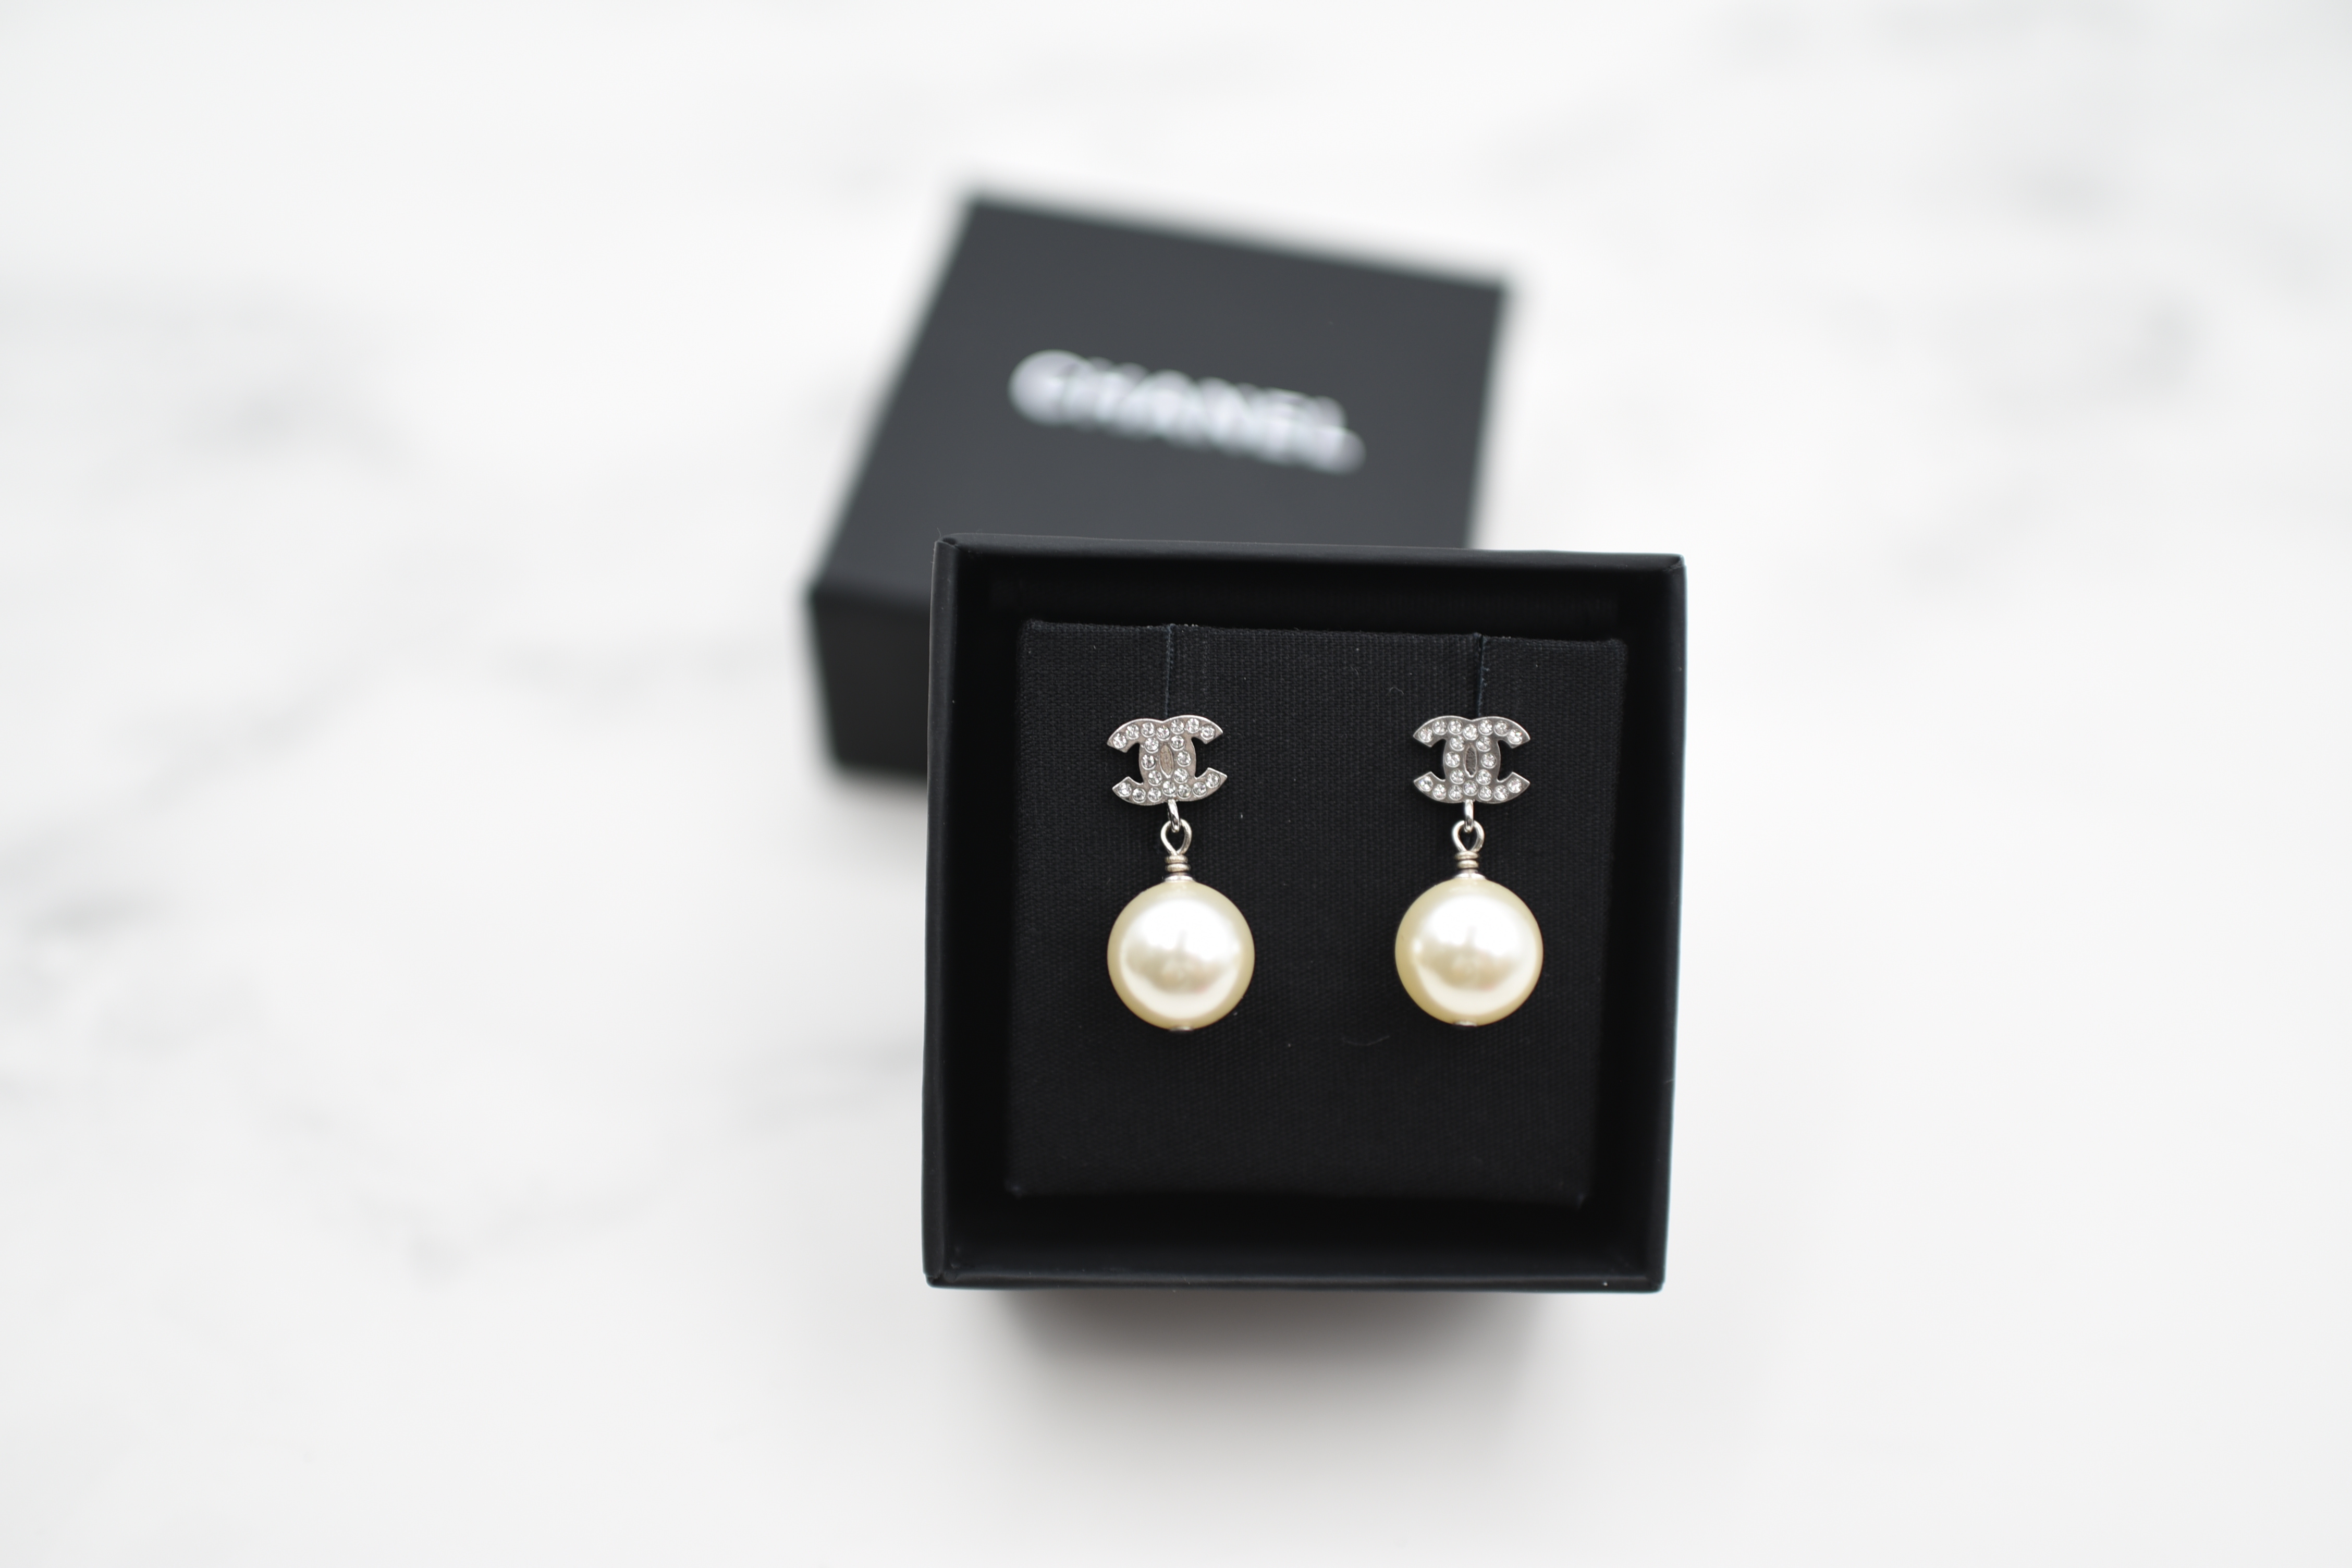 Chanel Earrings, CC Pearl and Crystal with Cha Nel Jacket, Gold Tone, New  in Box WA001